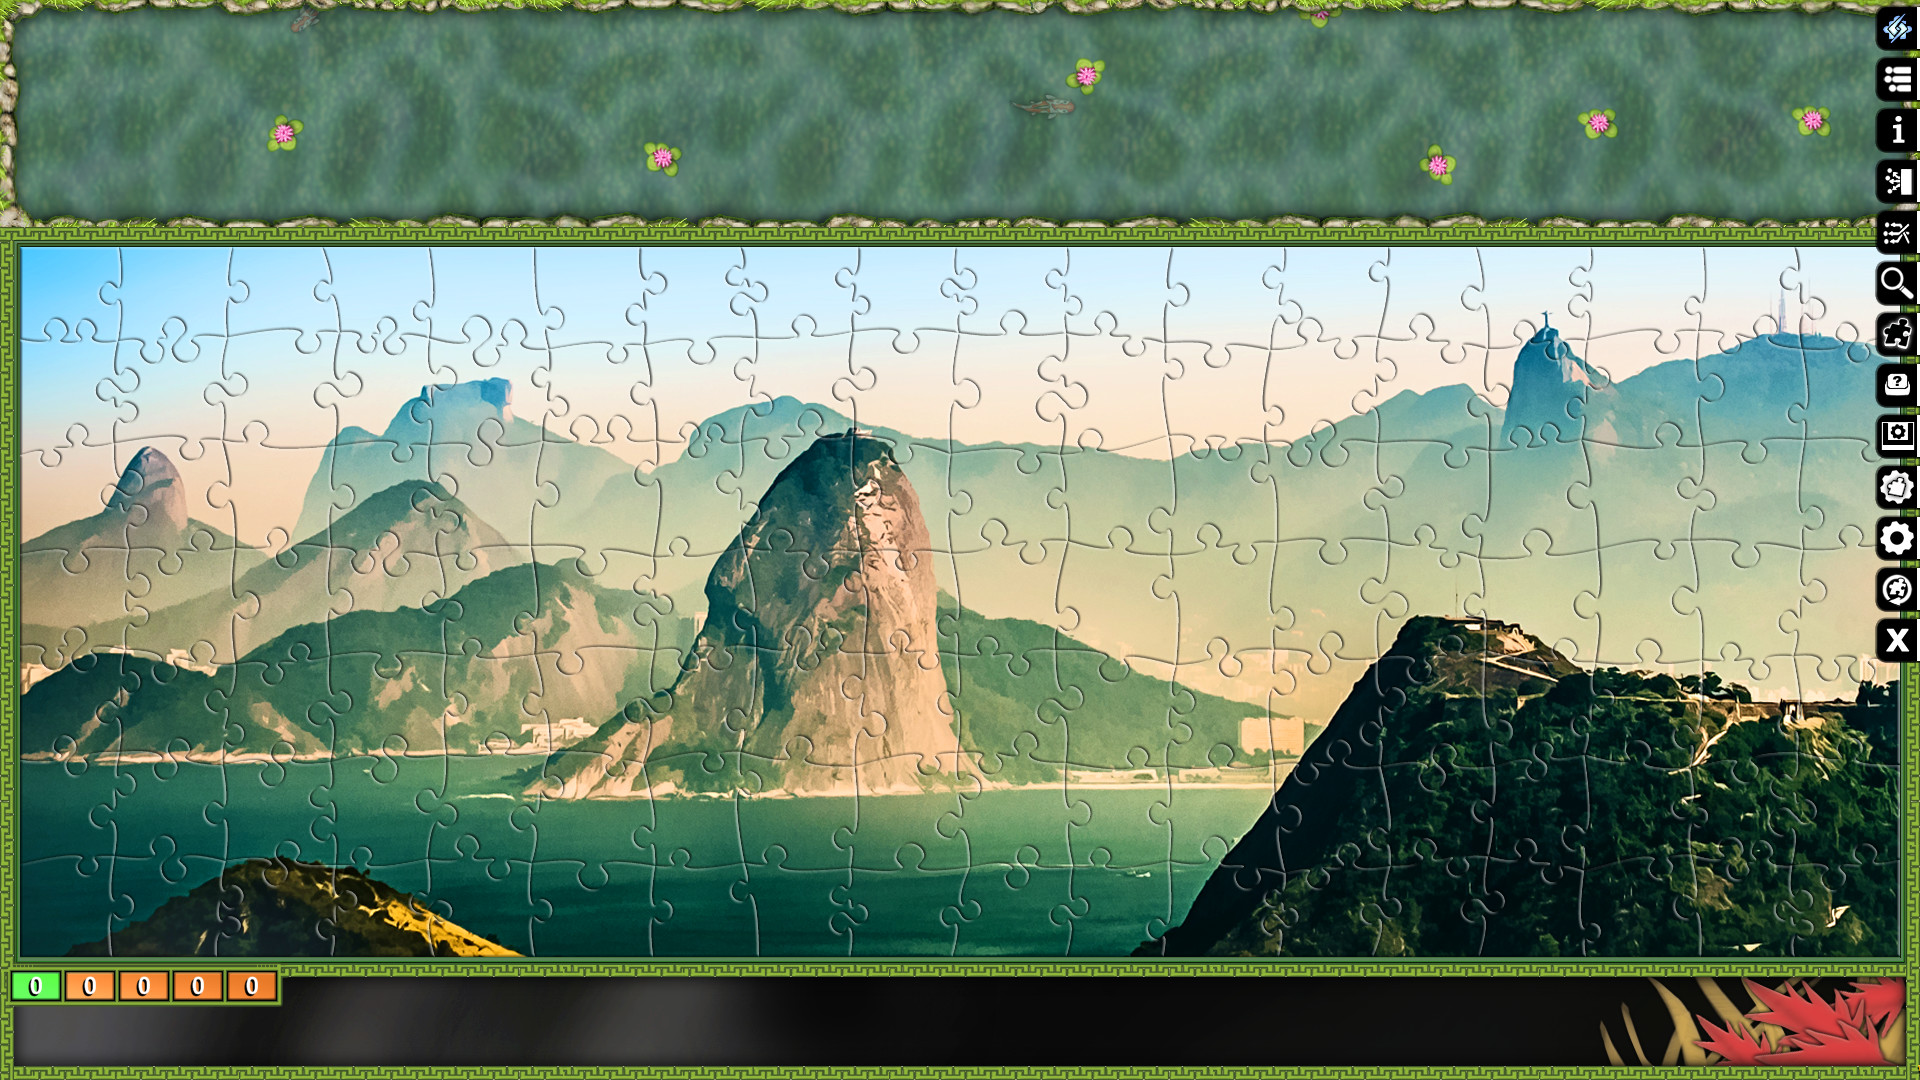 Jigsaw Puzzle Pack - Pixel Puzzles Ultimate: Rio Featured Screenshot #1